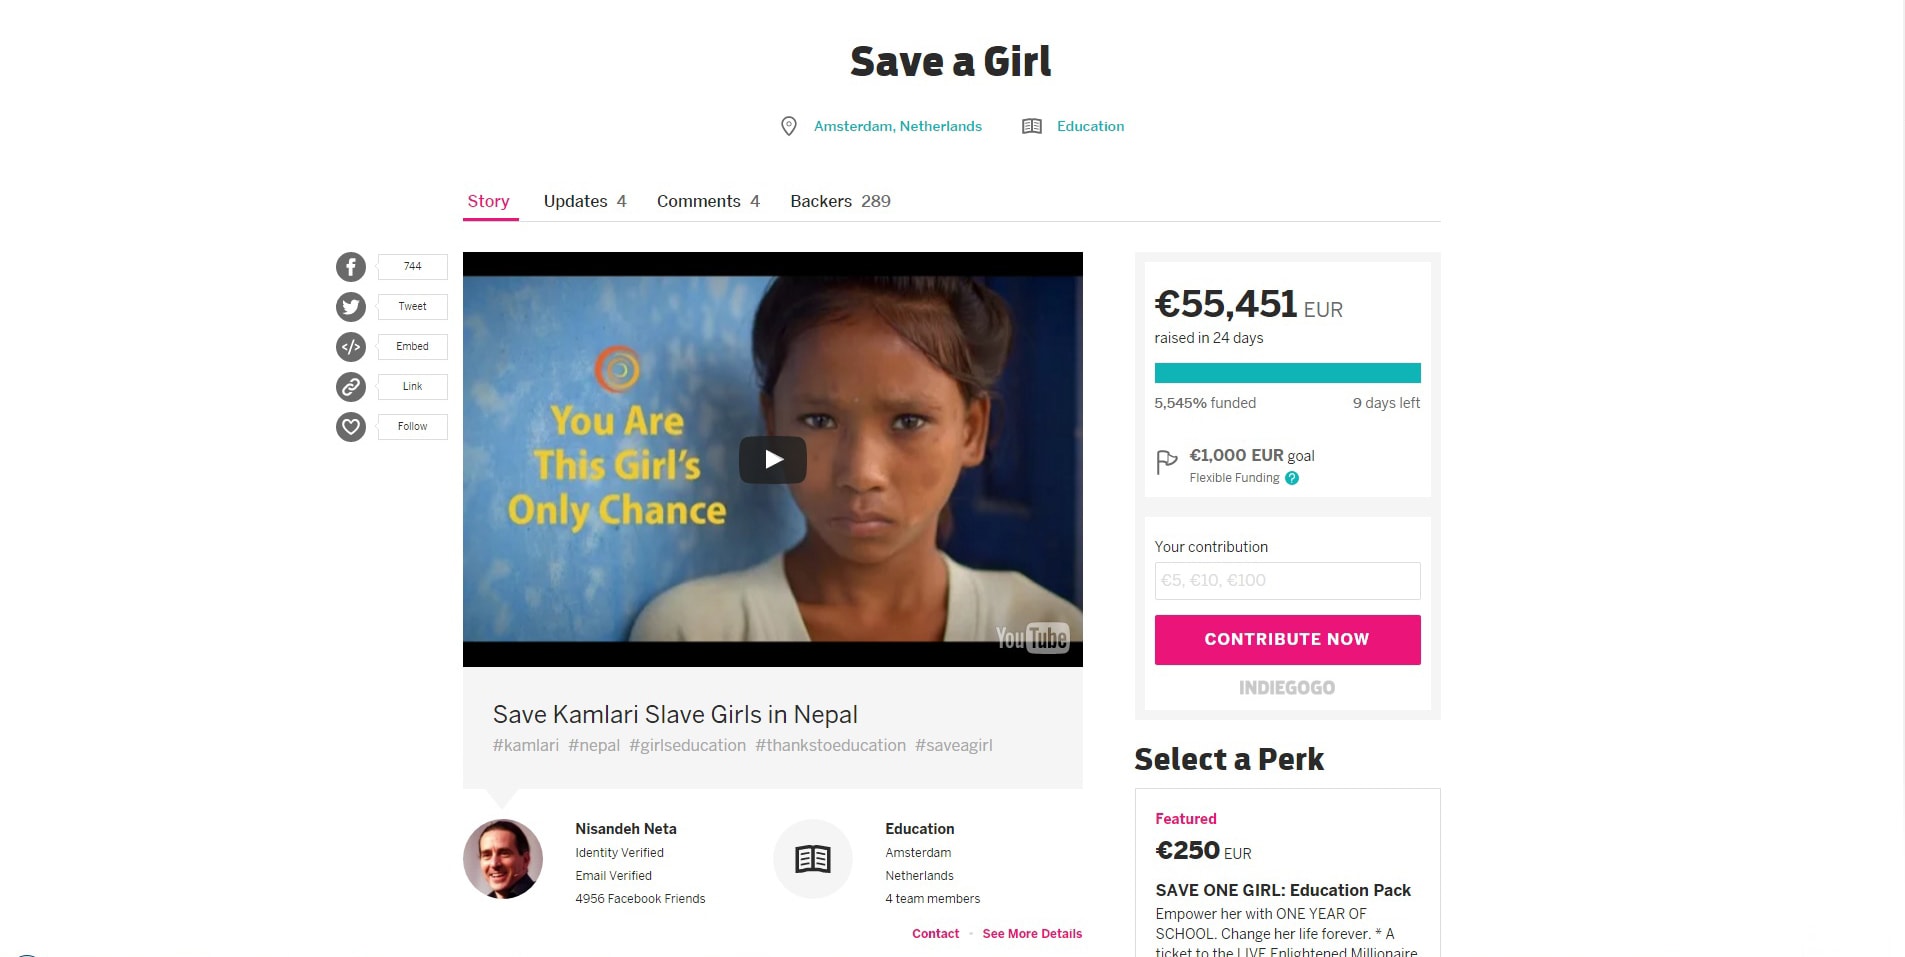 Save a girl - Indiegogo Campaign